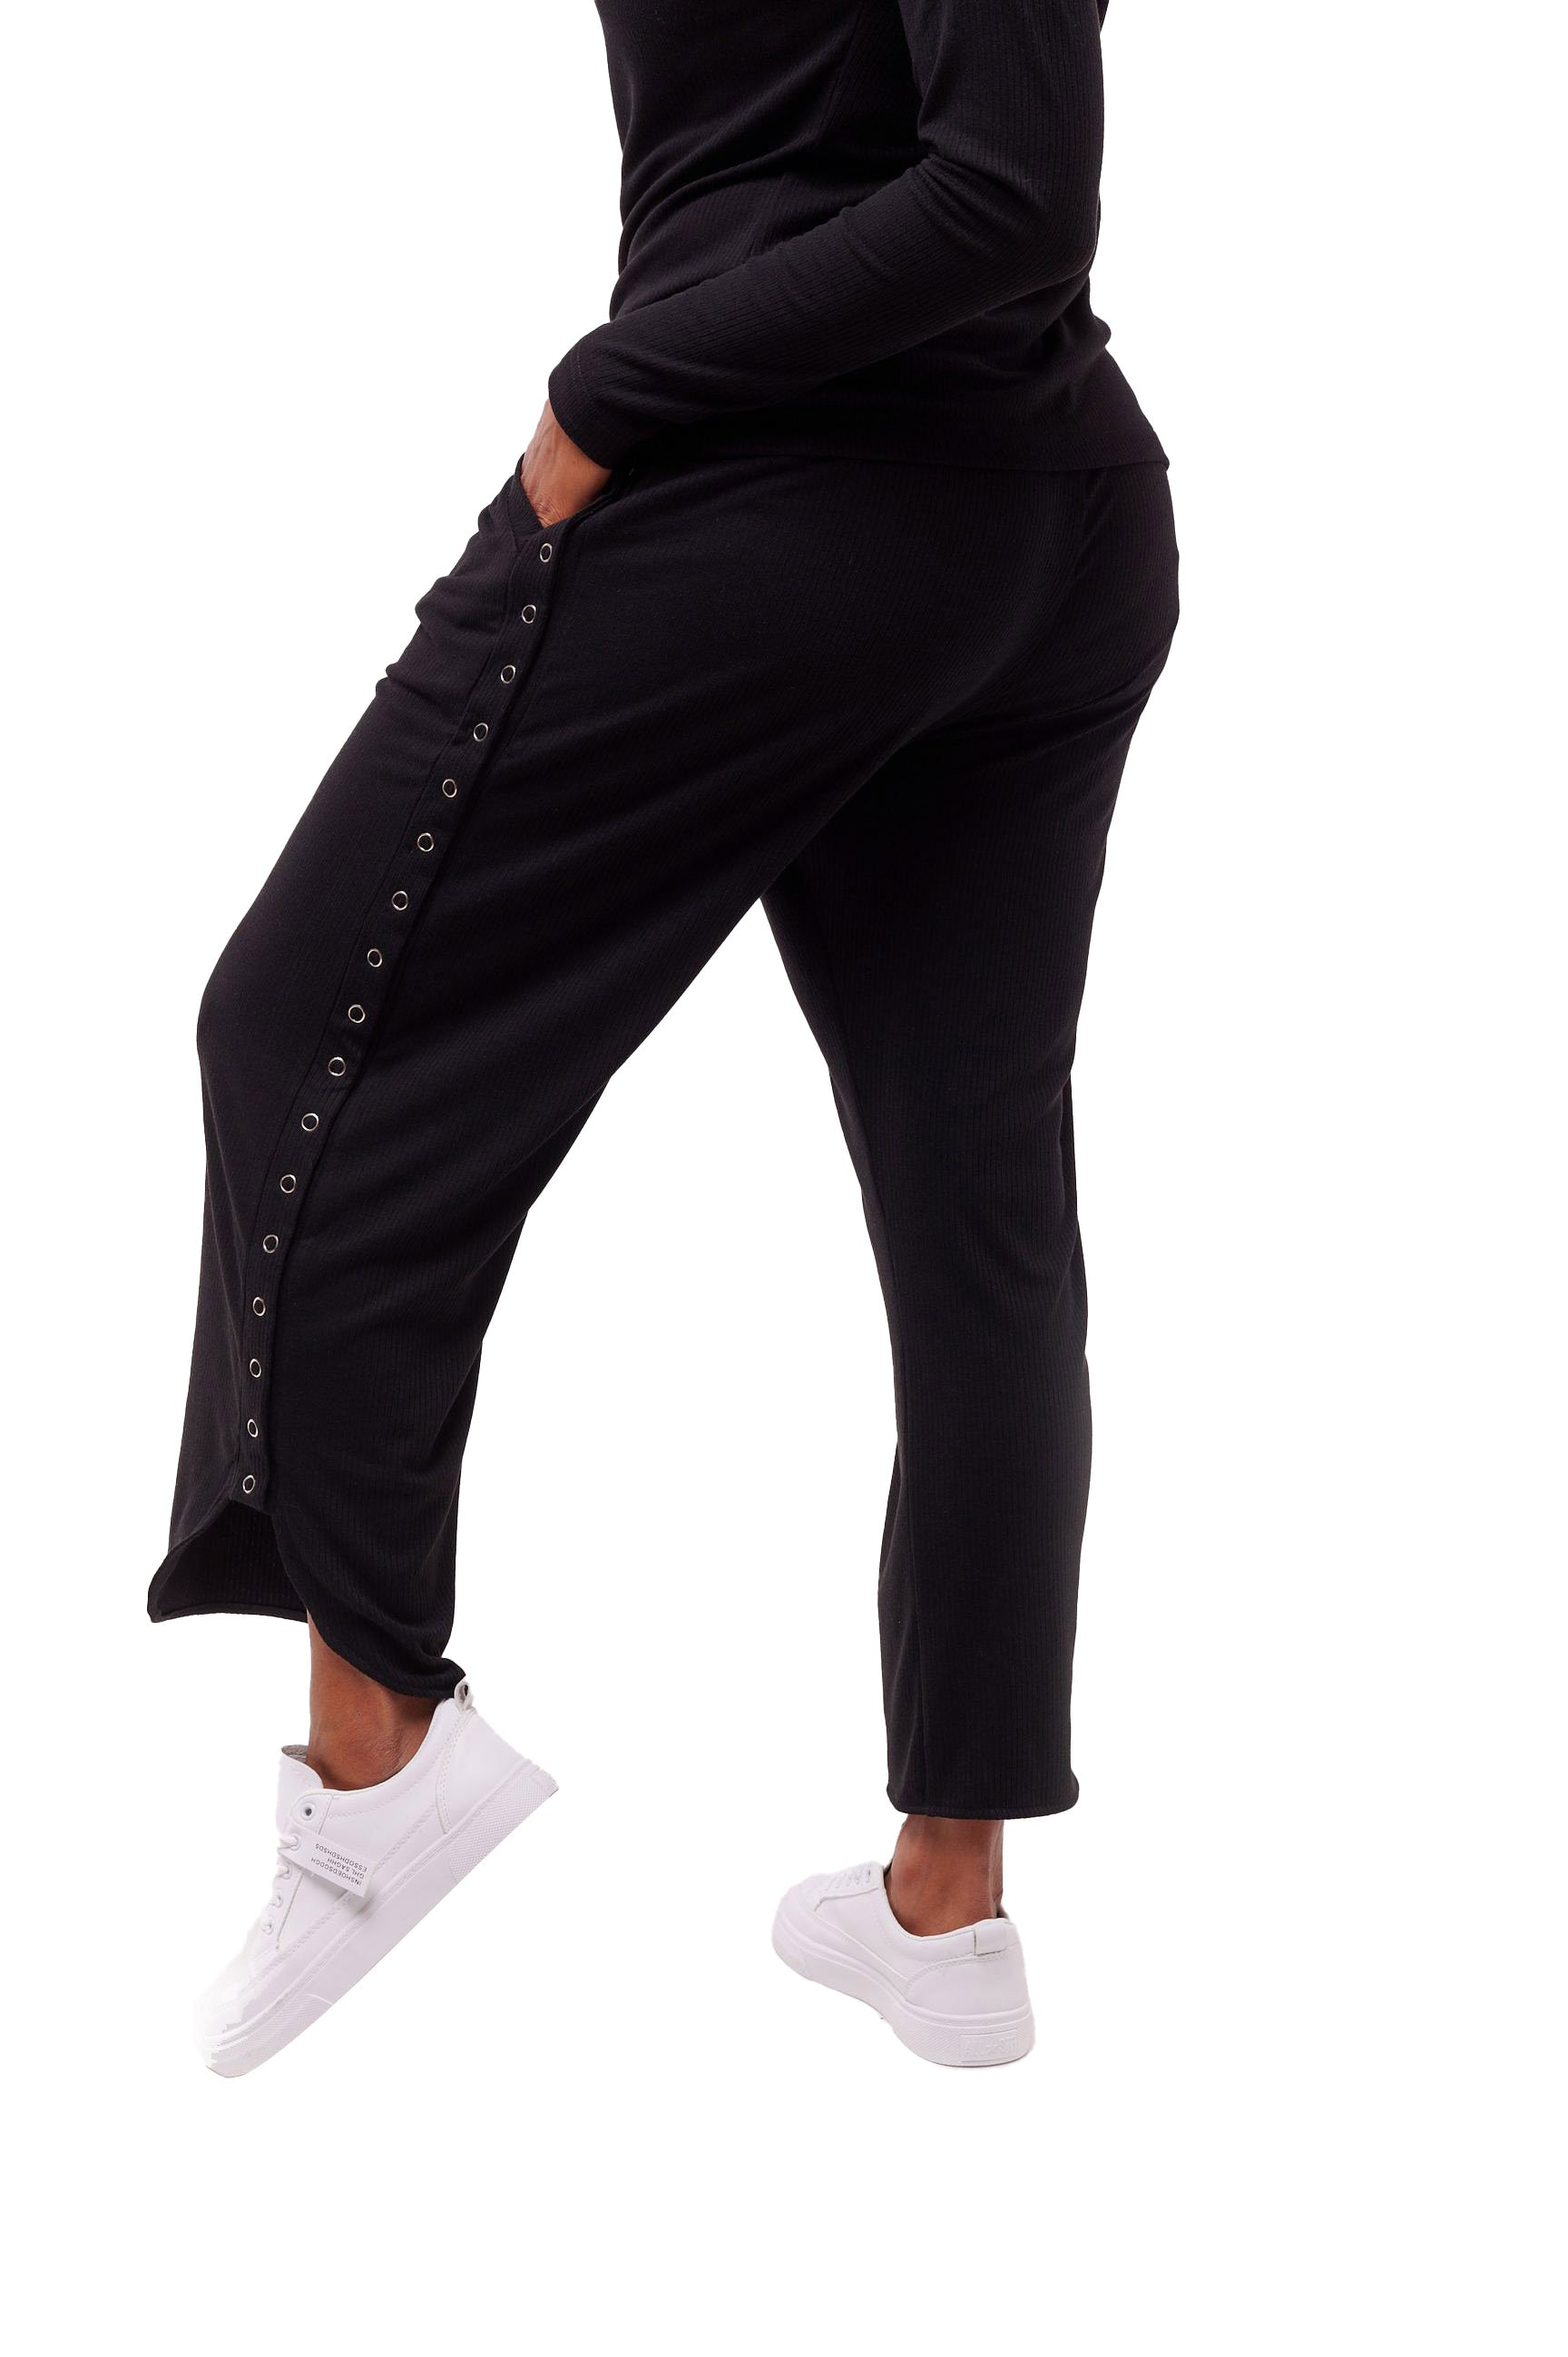 Tracksuit Bottoms for Women